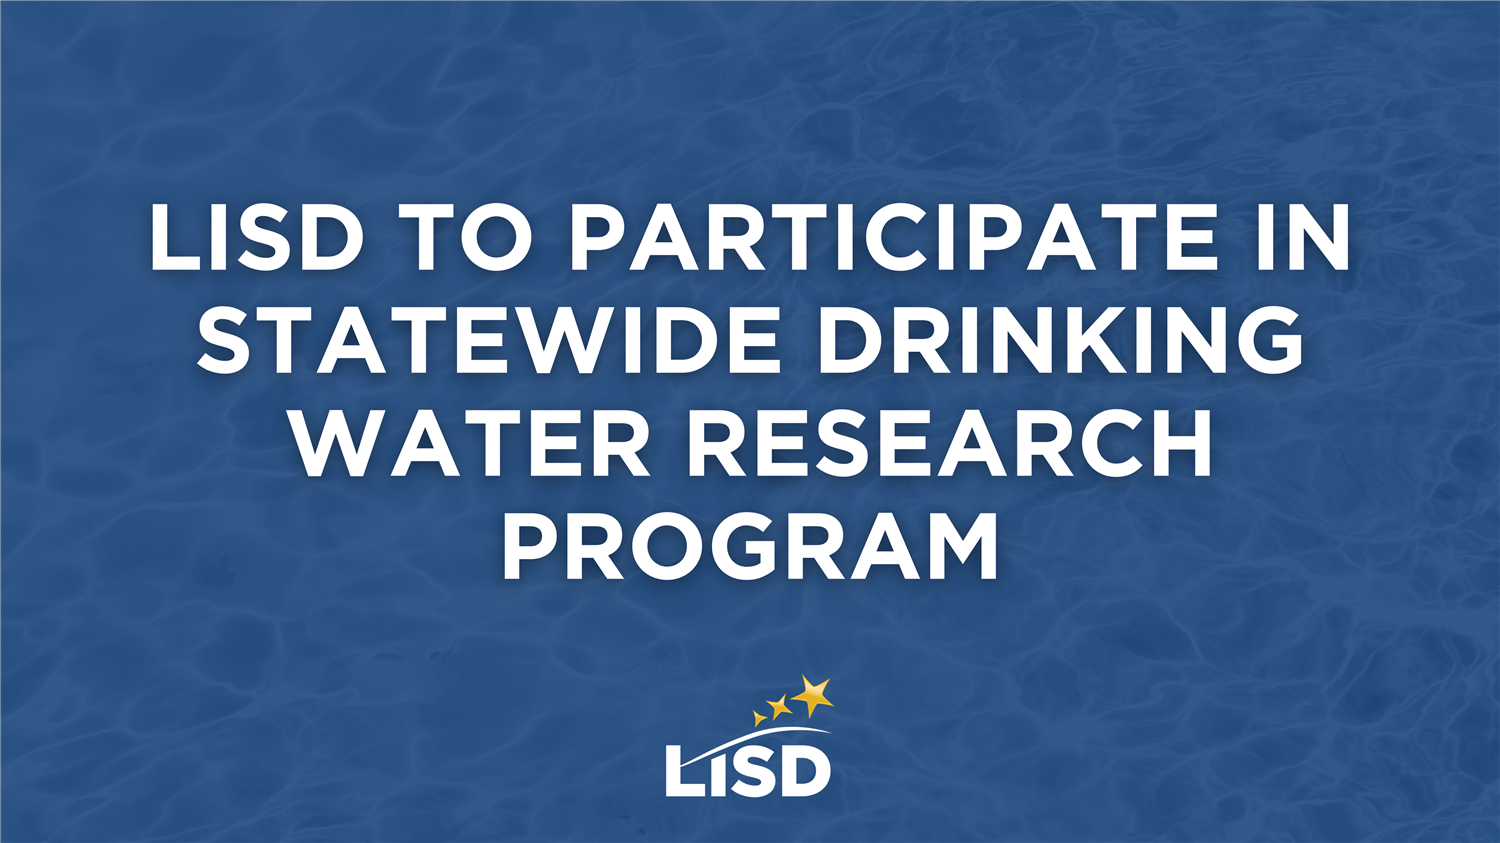 LISD to Participate in Statewide Drinking Water Research Program